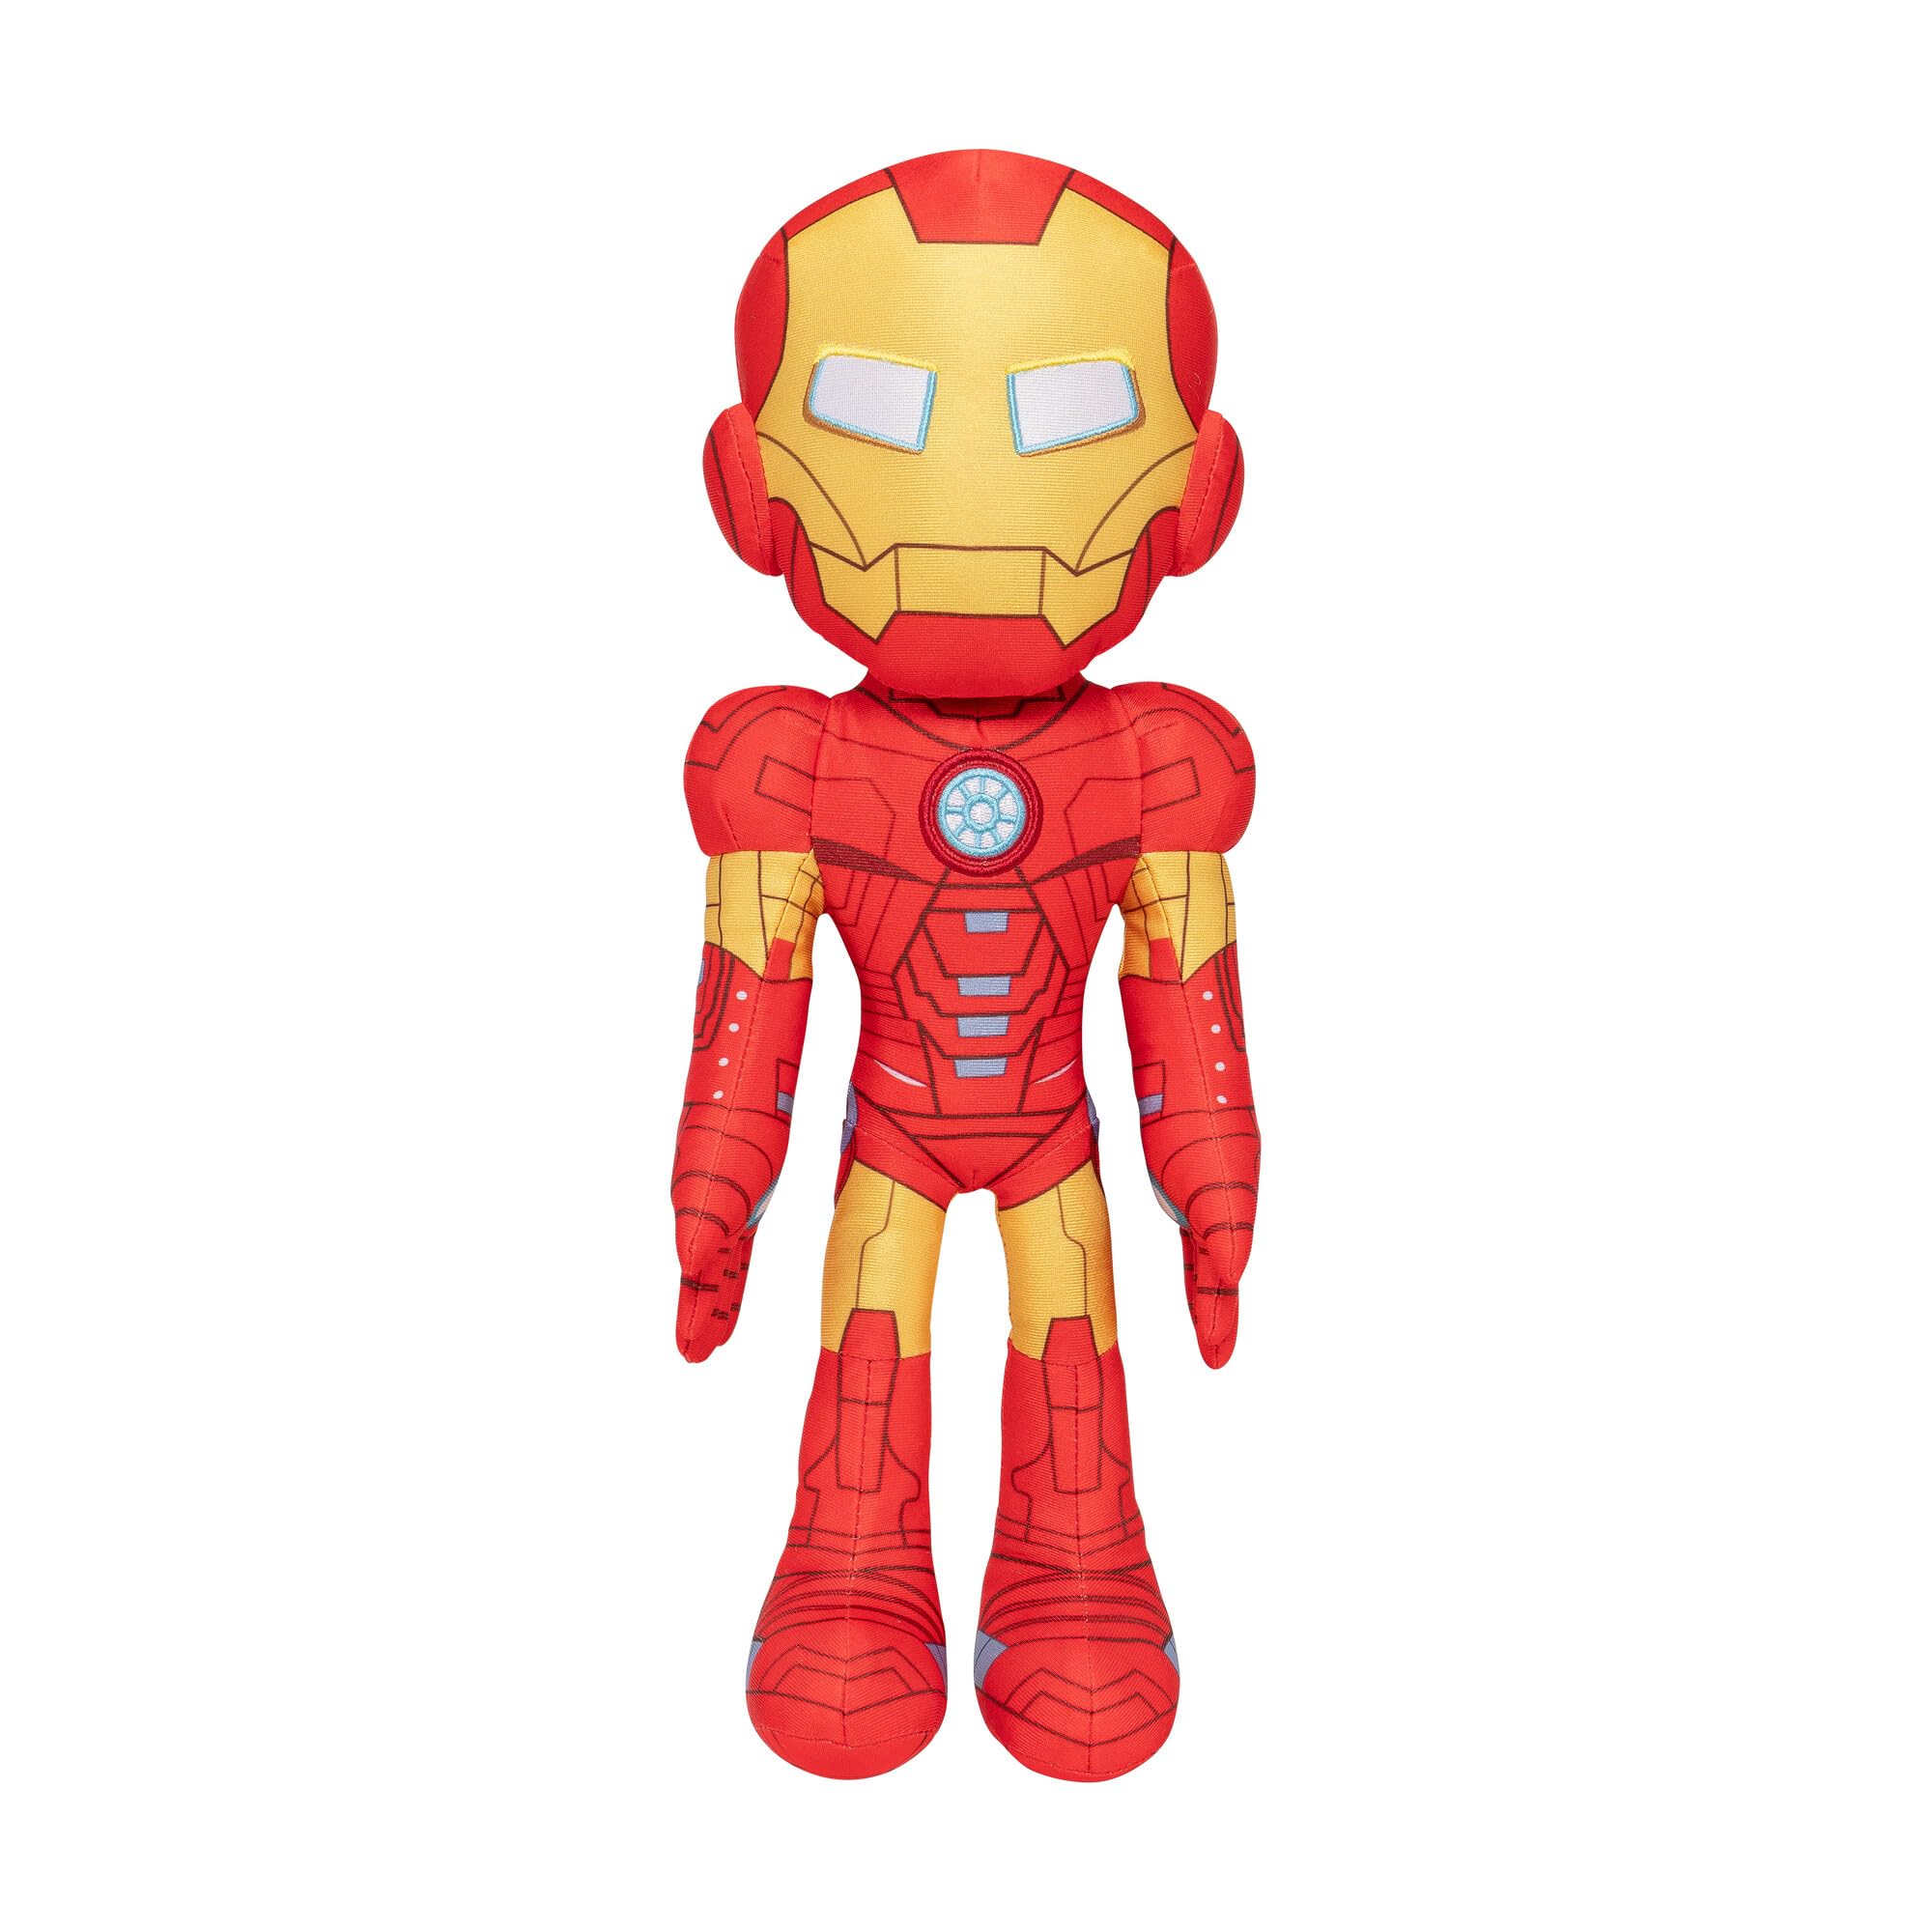 MARVEL Spidey and His Amazing Friends My Friend Iron Man Feature Plush - 16-Inch Talking Plush with 16 Unique Phrases